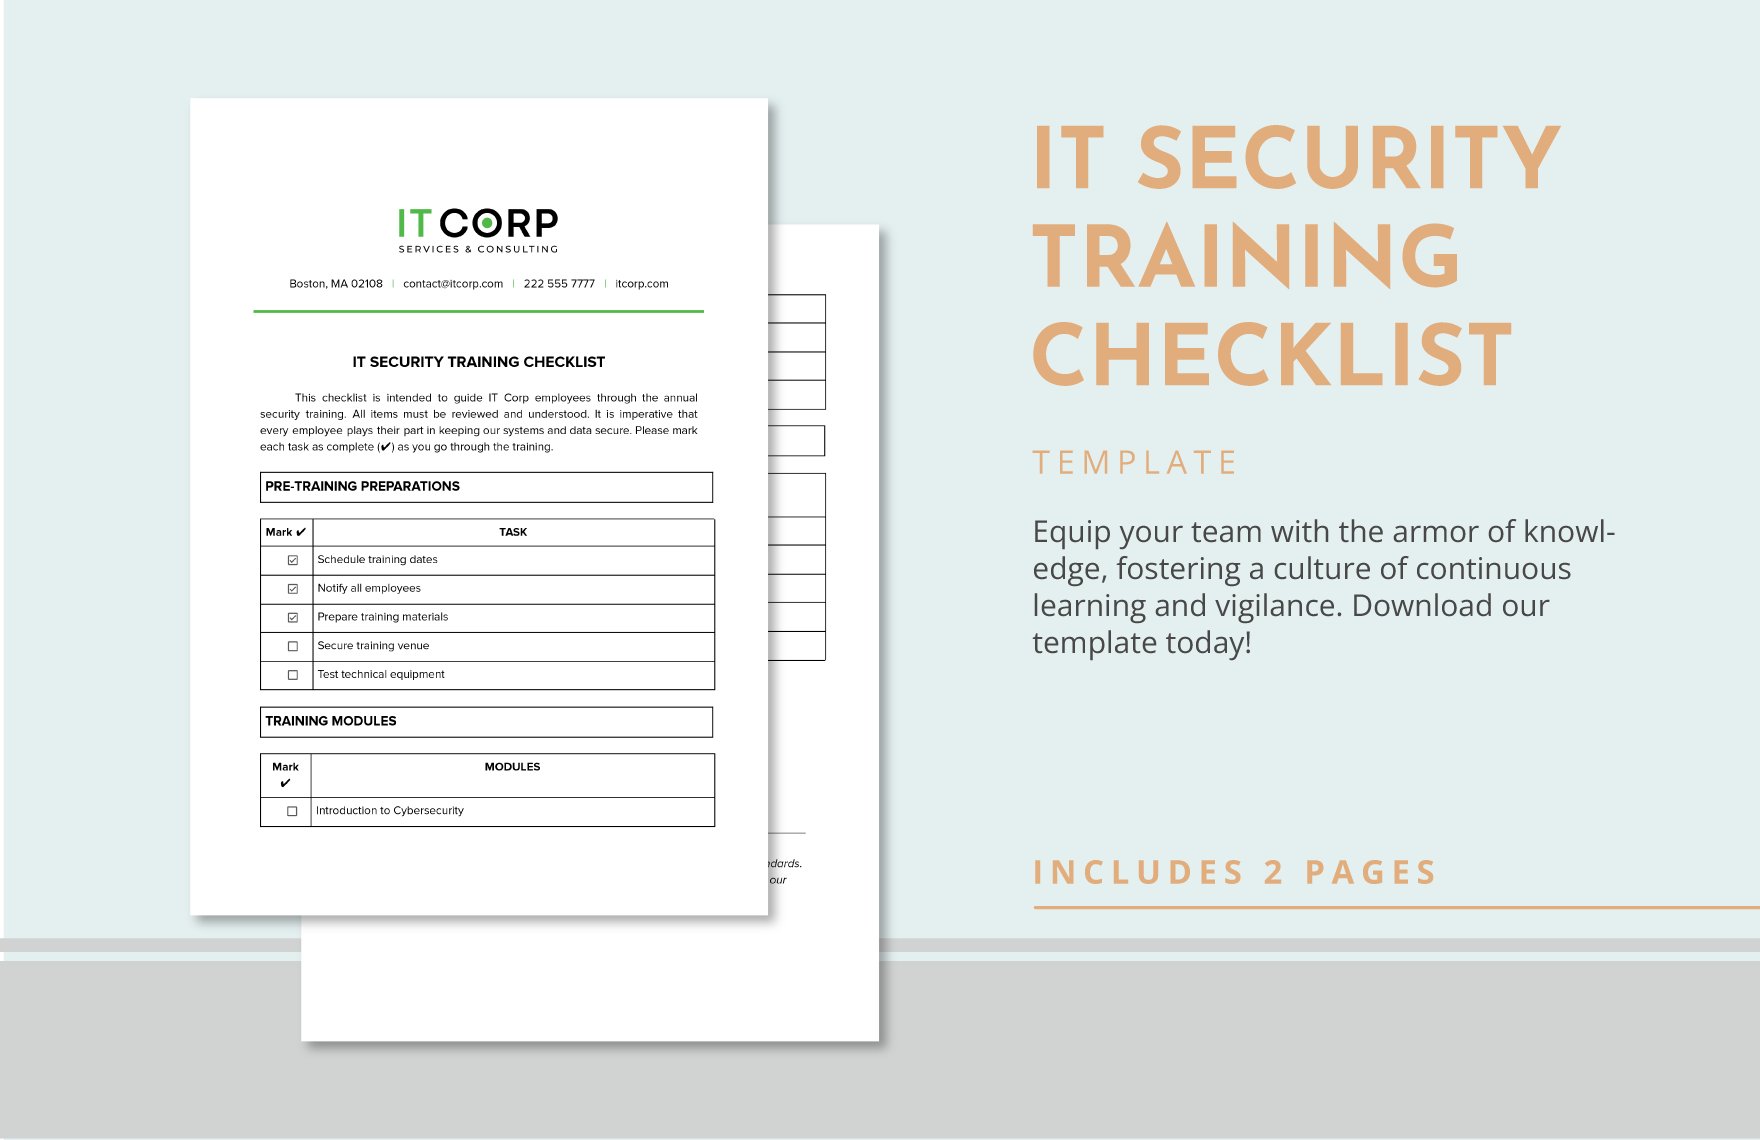 IT Security Training Checklist Template in Word, Google Docs, PDF